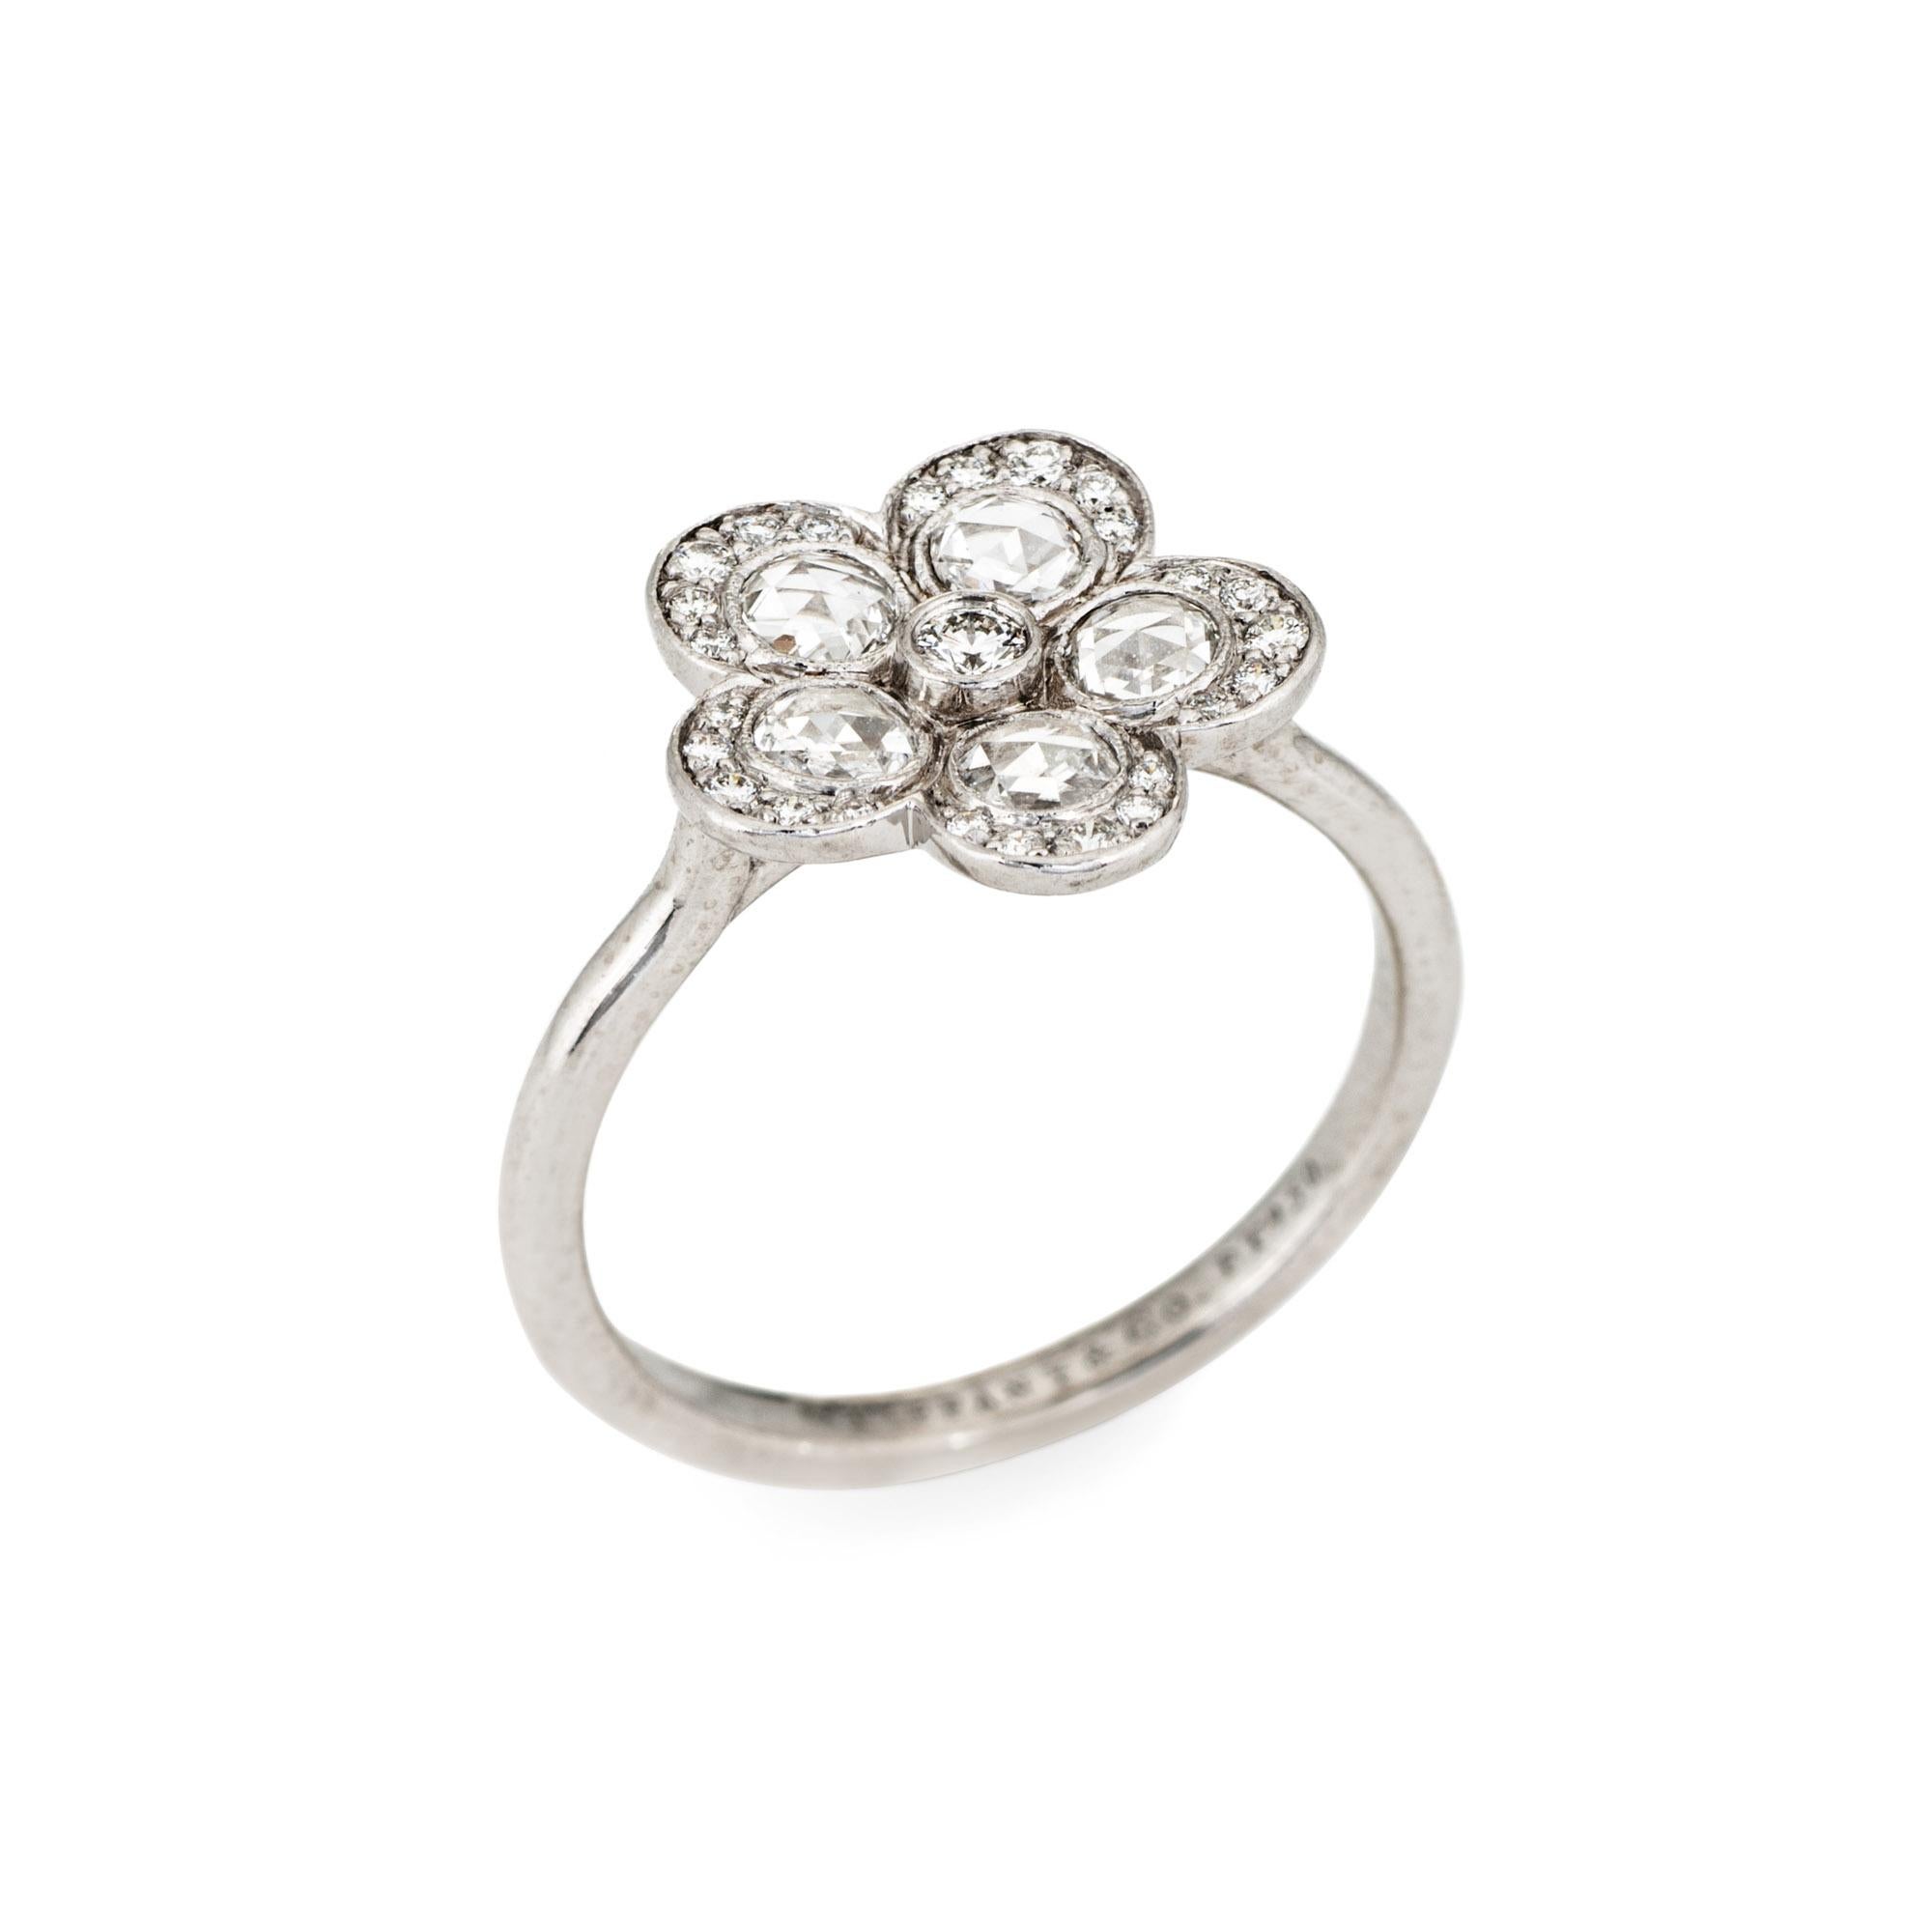 Estate Tiffany & Co diamond flower ring from the 'Enchant' collection, crafted in platinum.  

Rose cut and round brilliant cut diamonds total an estimated 0.70 carats (estimated at F-G color and VVS2 clarity).

From the Tiffany & Co 'Enchant'